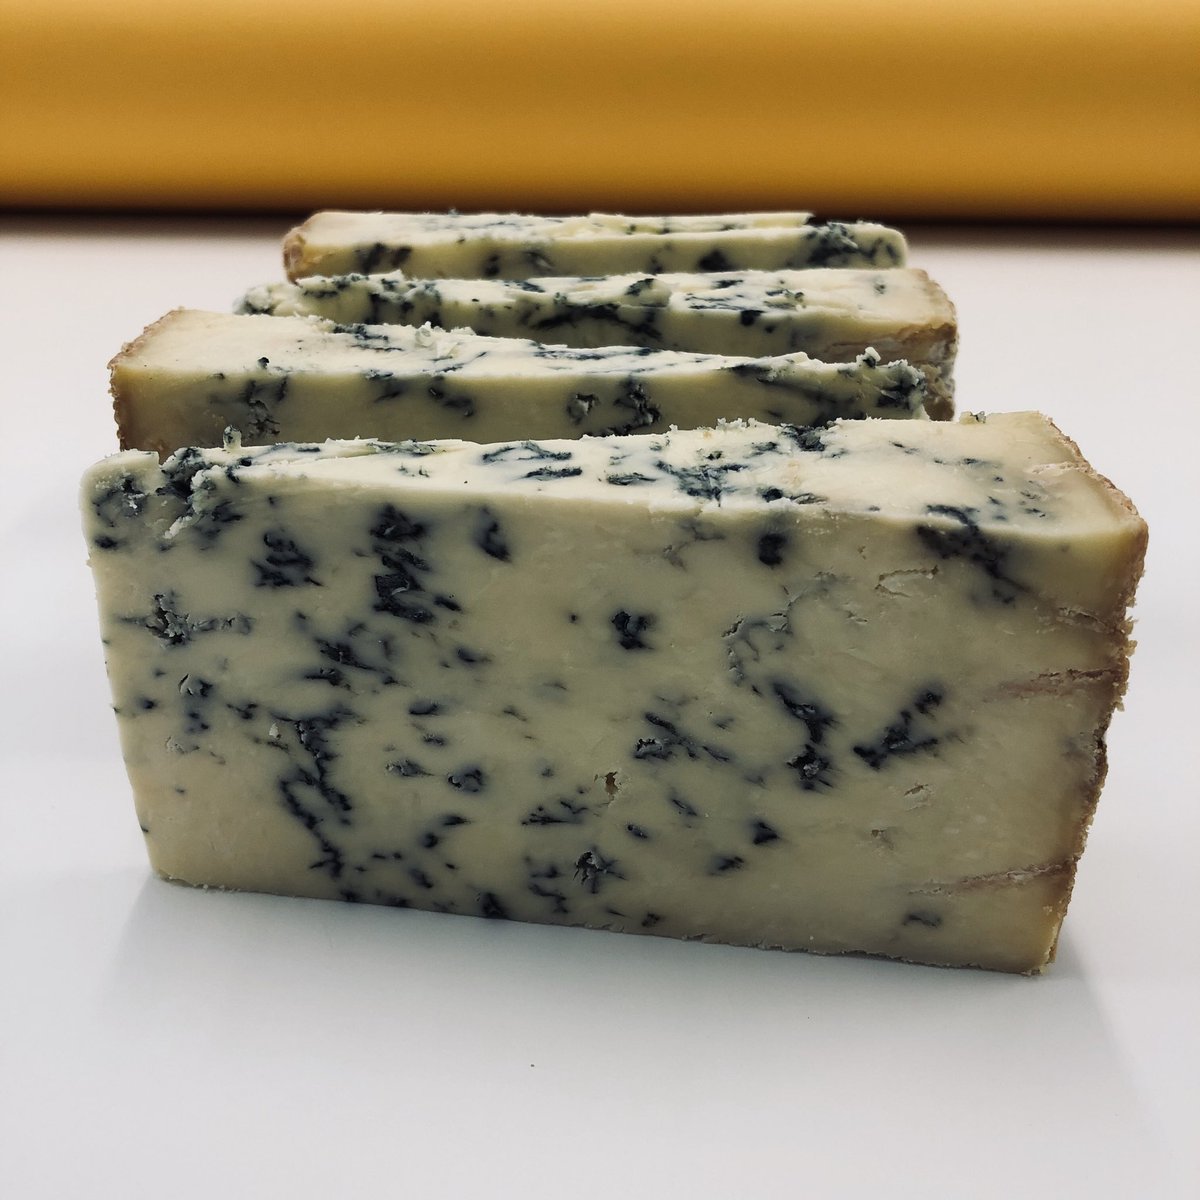 Cropwell Bishop Organic Stilton. A cheese for life, not just for Christmas.

#cheese #cheesesubscription #foodsubscription #christmascheese